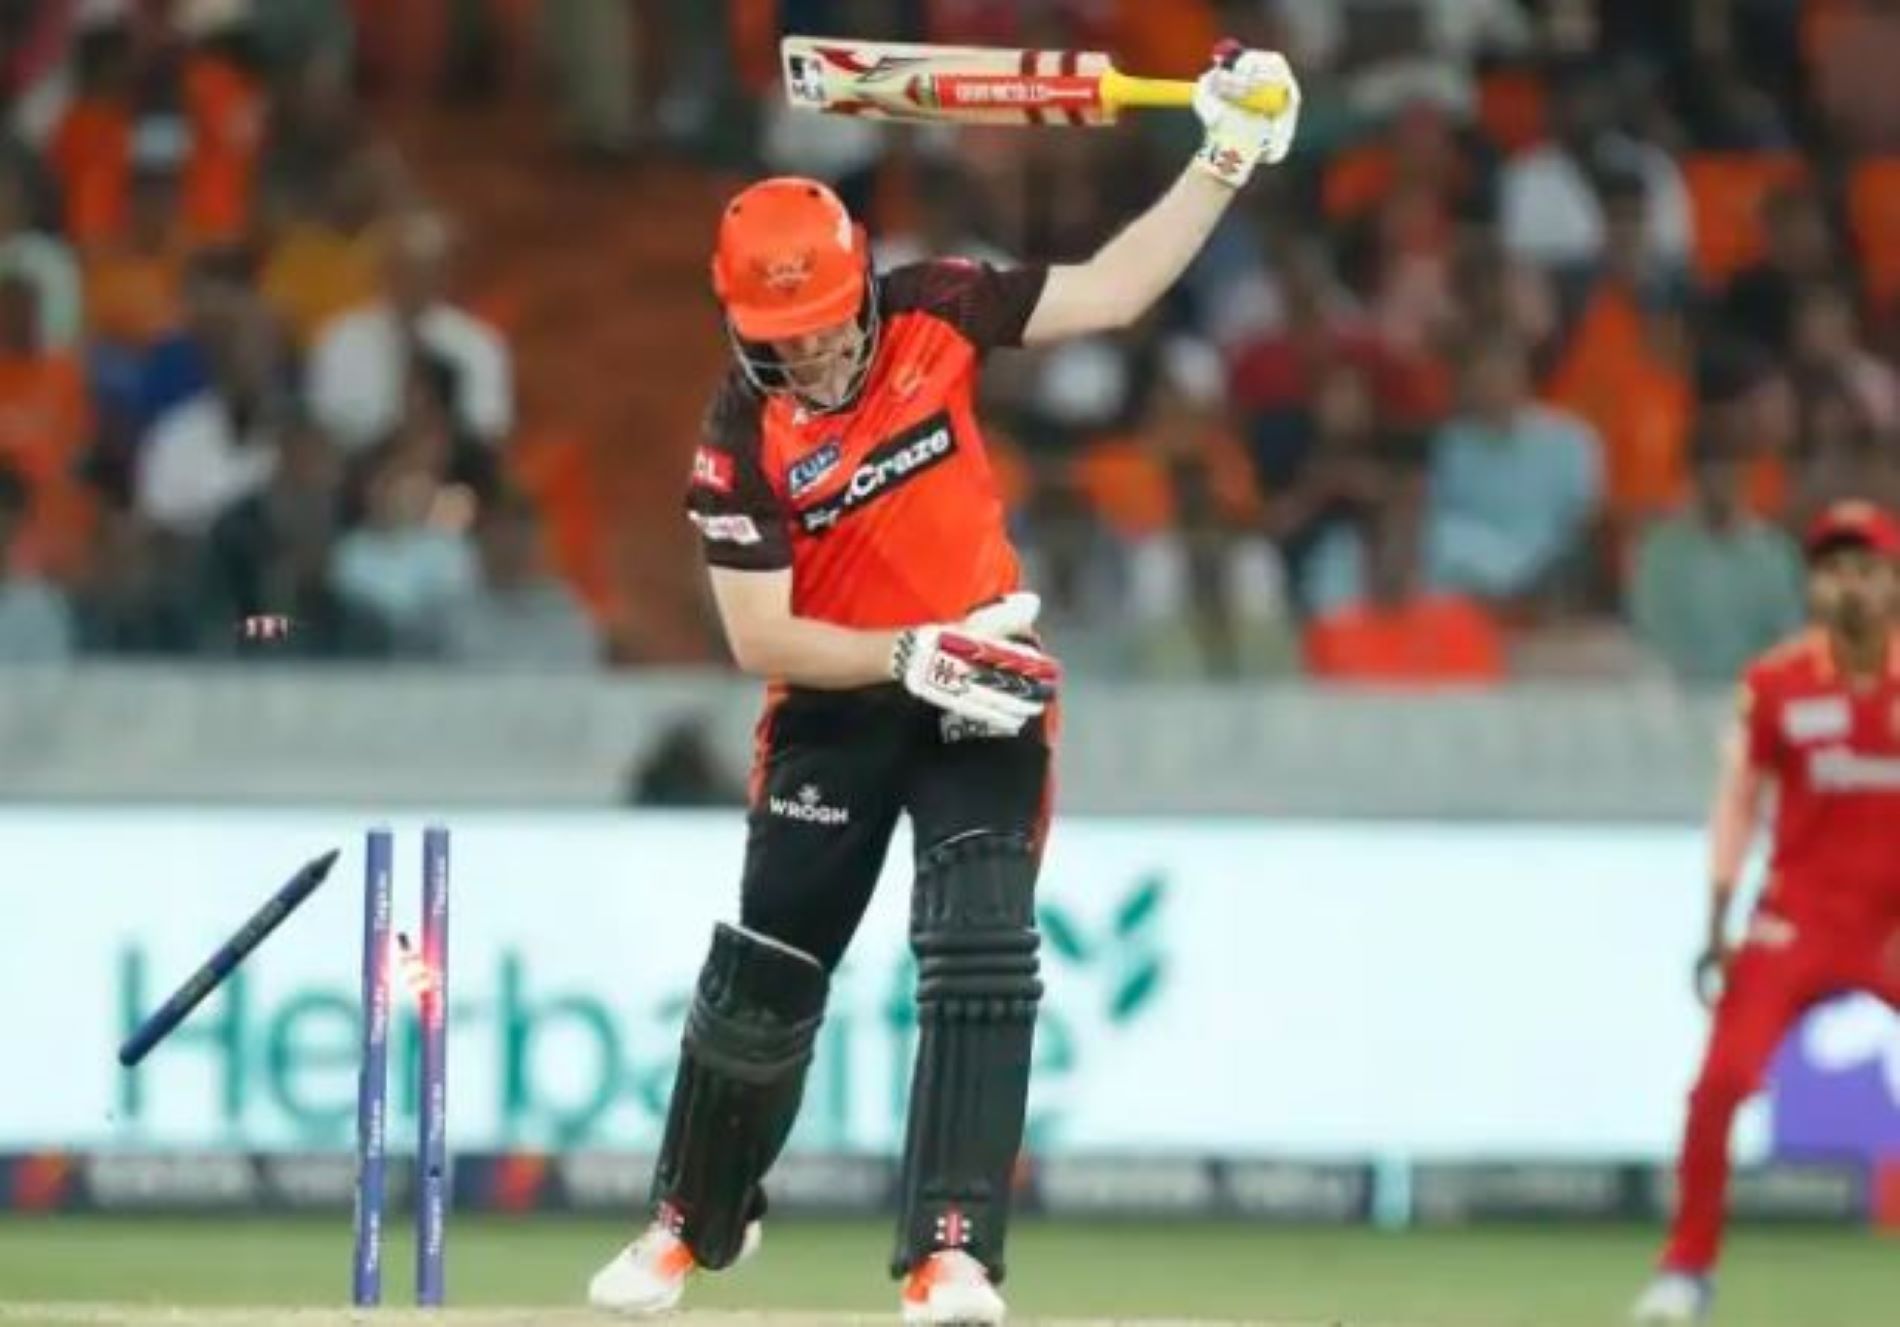 Brook struggled mightily in his maiden IPL season this year